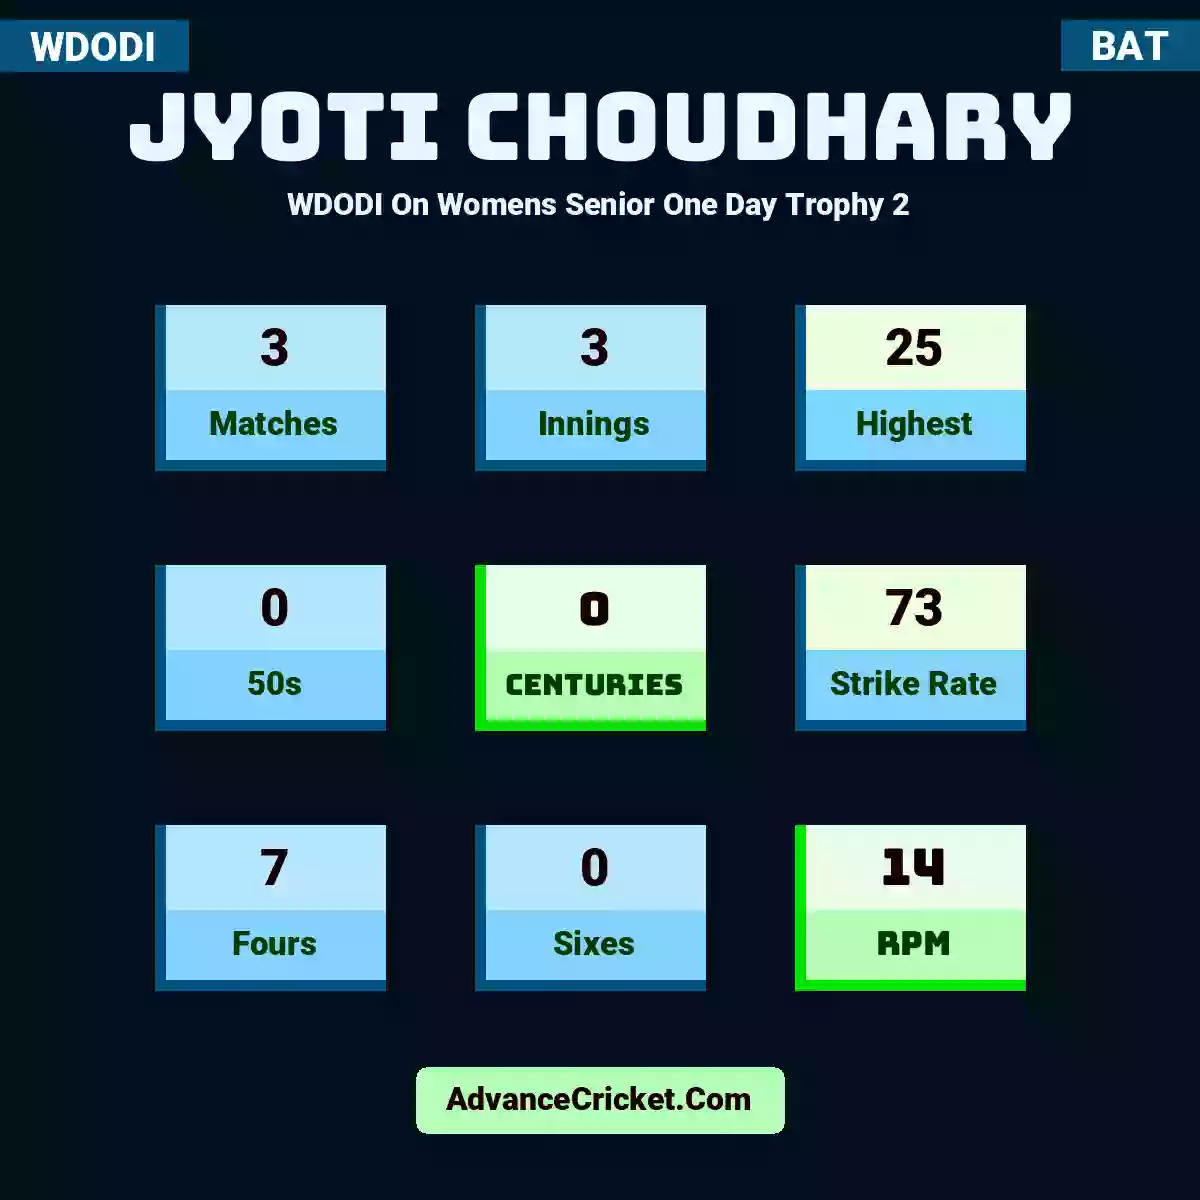 Jyoti Choudhary WDODI  On Womens Senior One Day Trophy 2, Jyoti Choudhary played 3 matches, scored 25 runs as highest, 0 half-centuries, and 0 centuries, with a strike rate of 73. J.Choudhary hit 7 fours and 0 sixes, with an RPM of 14.